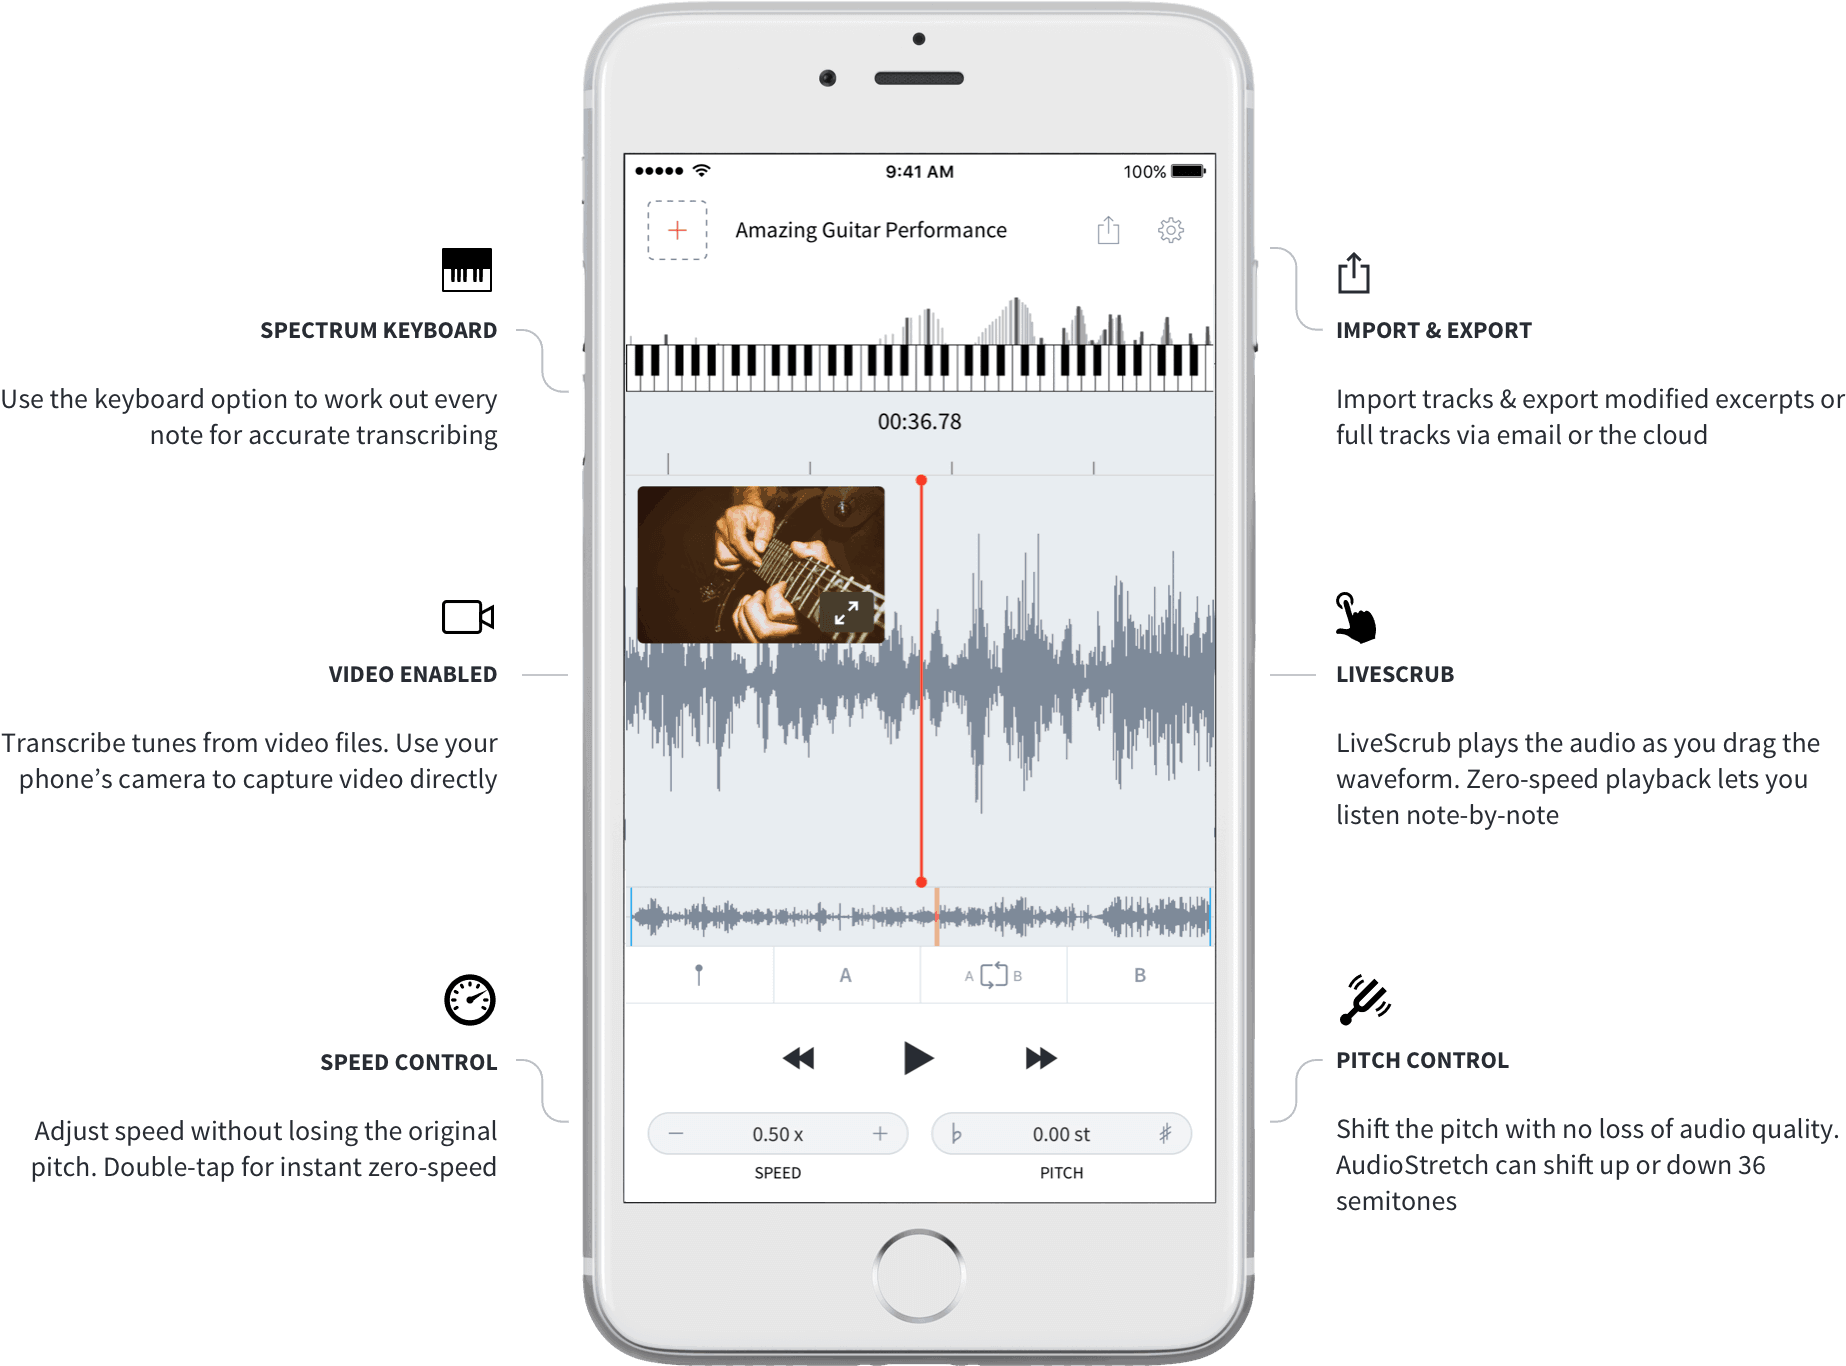 The AudioStretch audio transcription app works for videos, too.